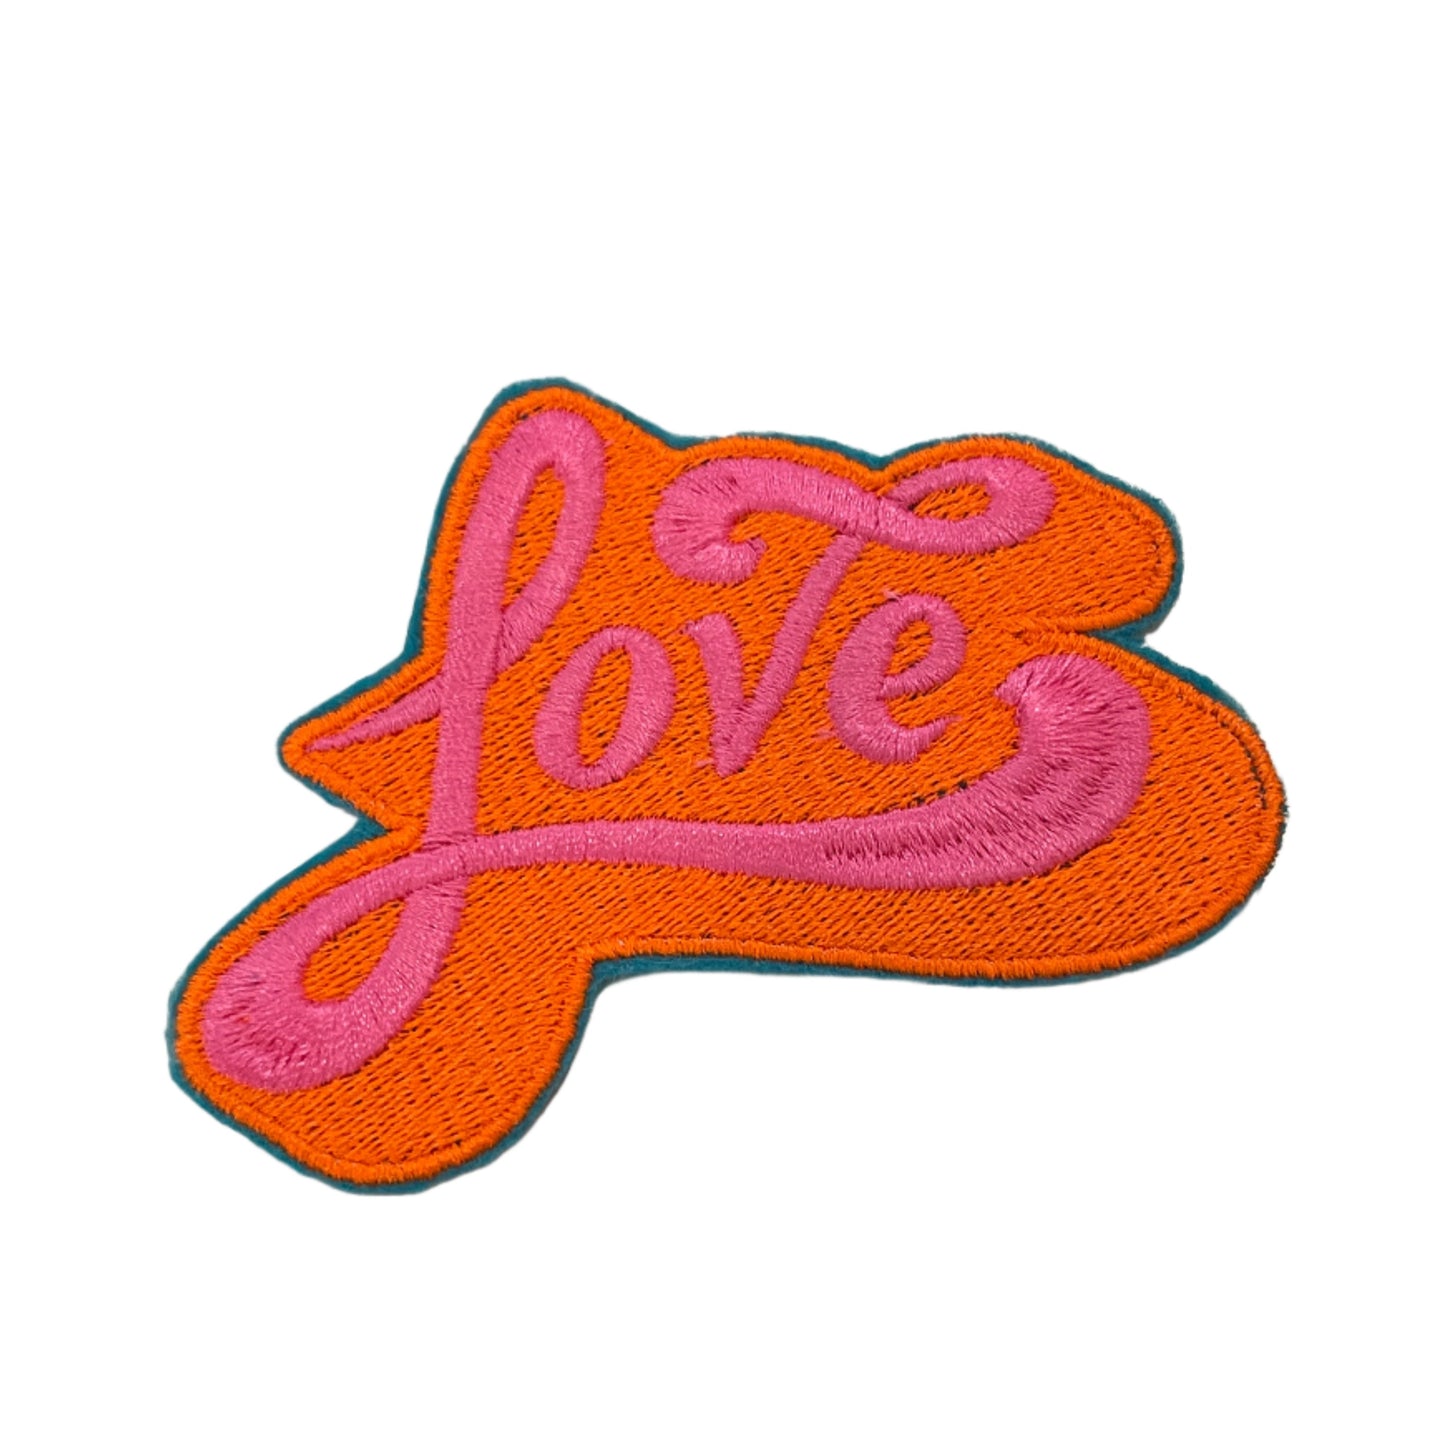 Handmade Love Iron-On Patch | Neon Pink on Bold Orange with Aqua Outline